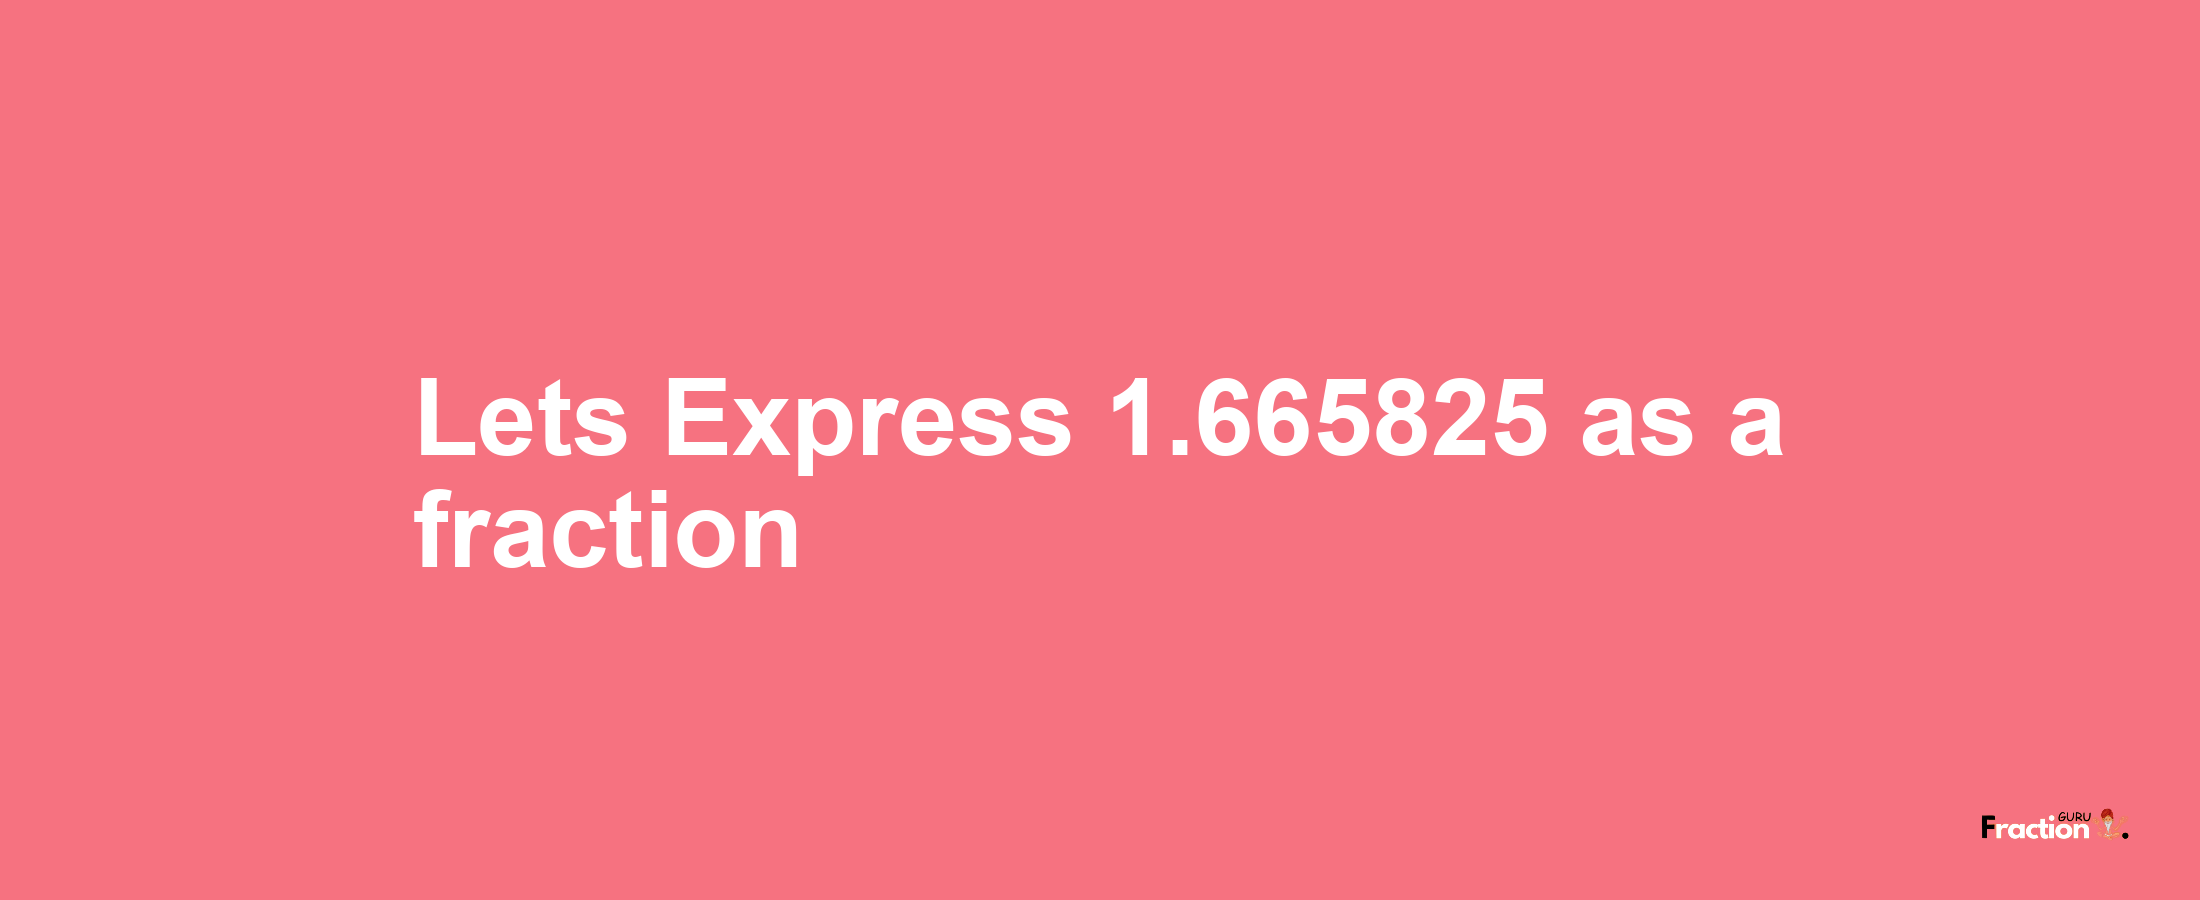 Lets Express 1.665825 as afraction